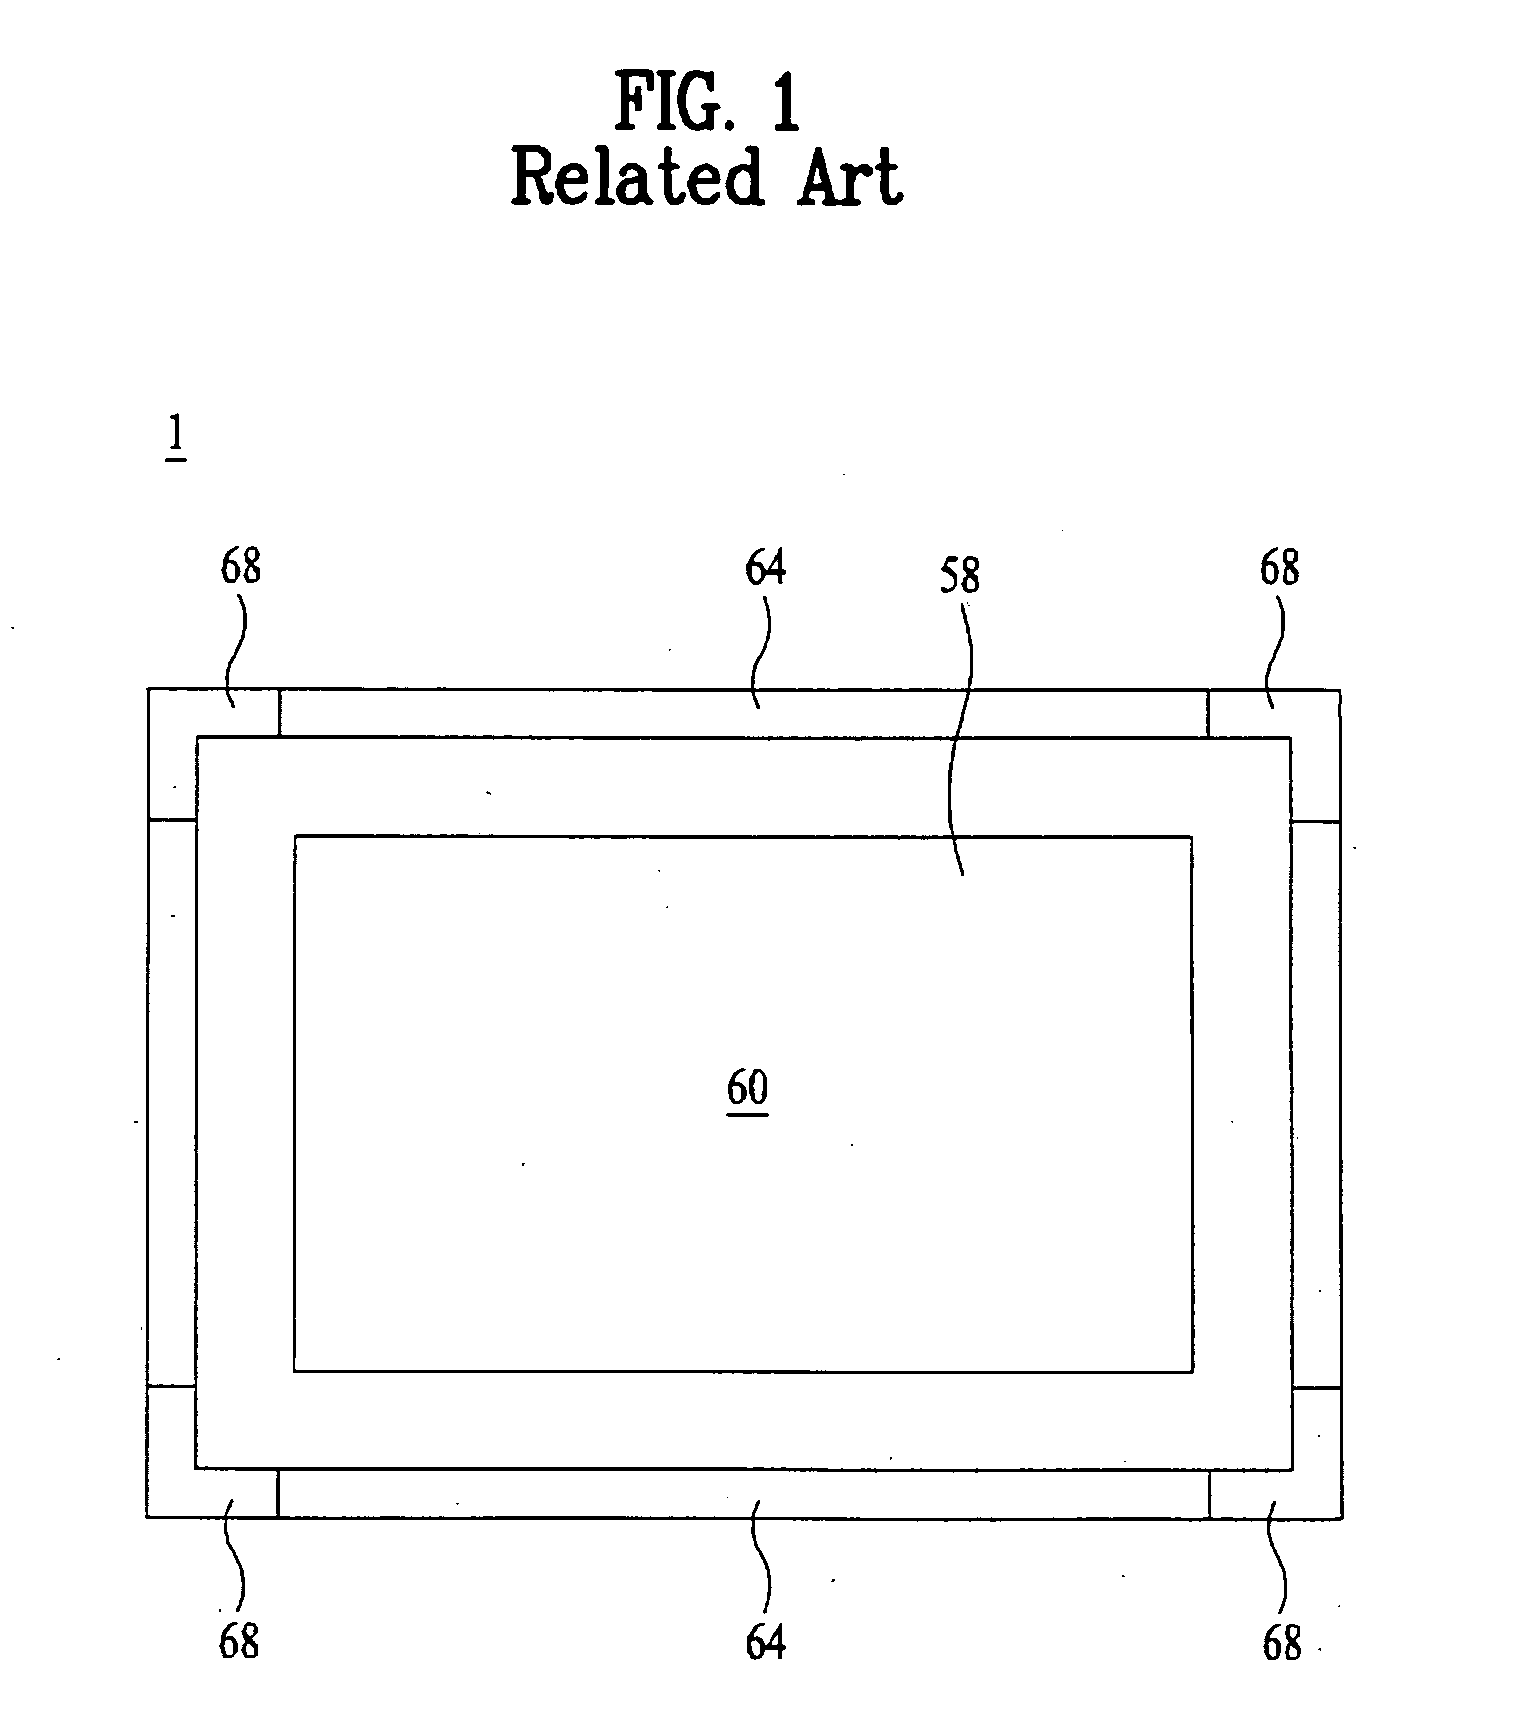 Touch panel display device